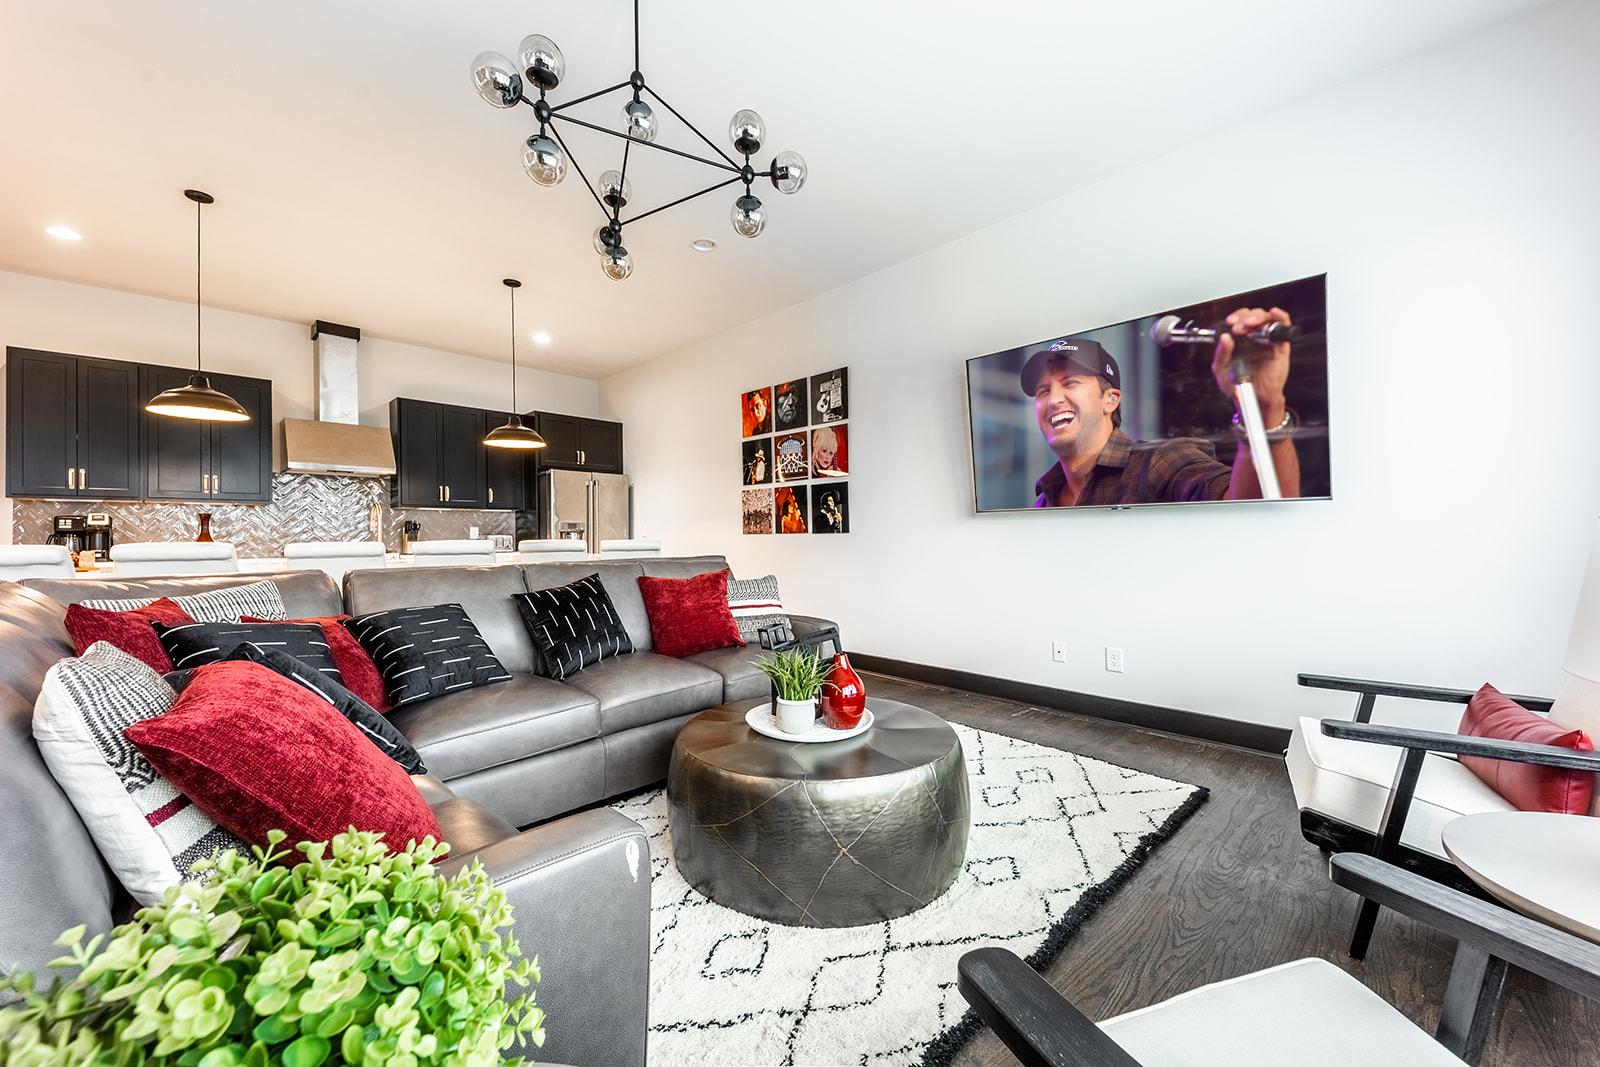 Unit 1: Bright and open living area with designer furnishings and smart TV.